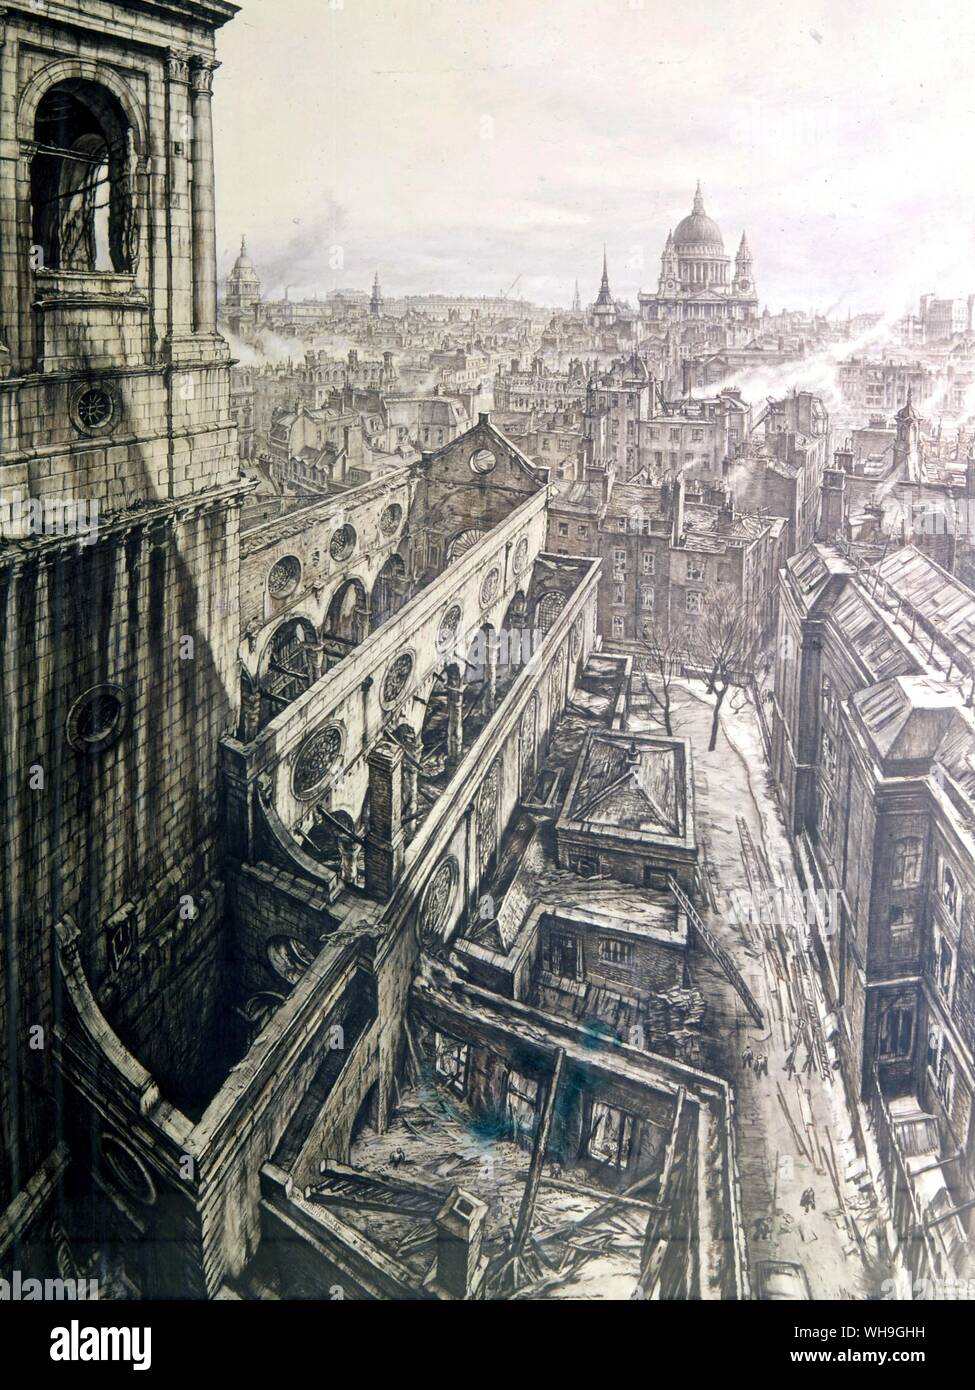 Battle of Britain bombing London show in this artworkof St Bride's and the City after the Fire 29 December 1940 chalk and pen work by Sir Muirhead Bone Stock Photo